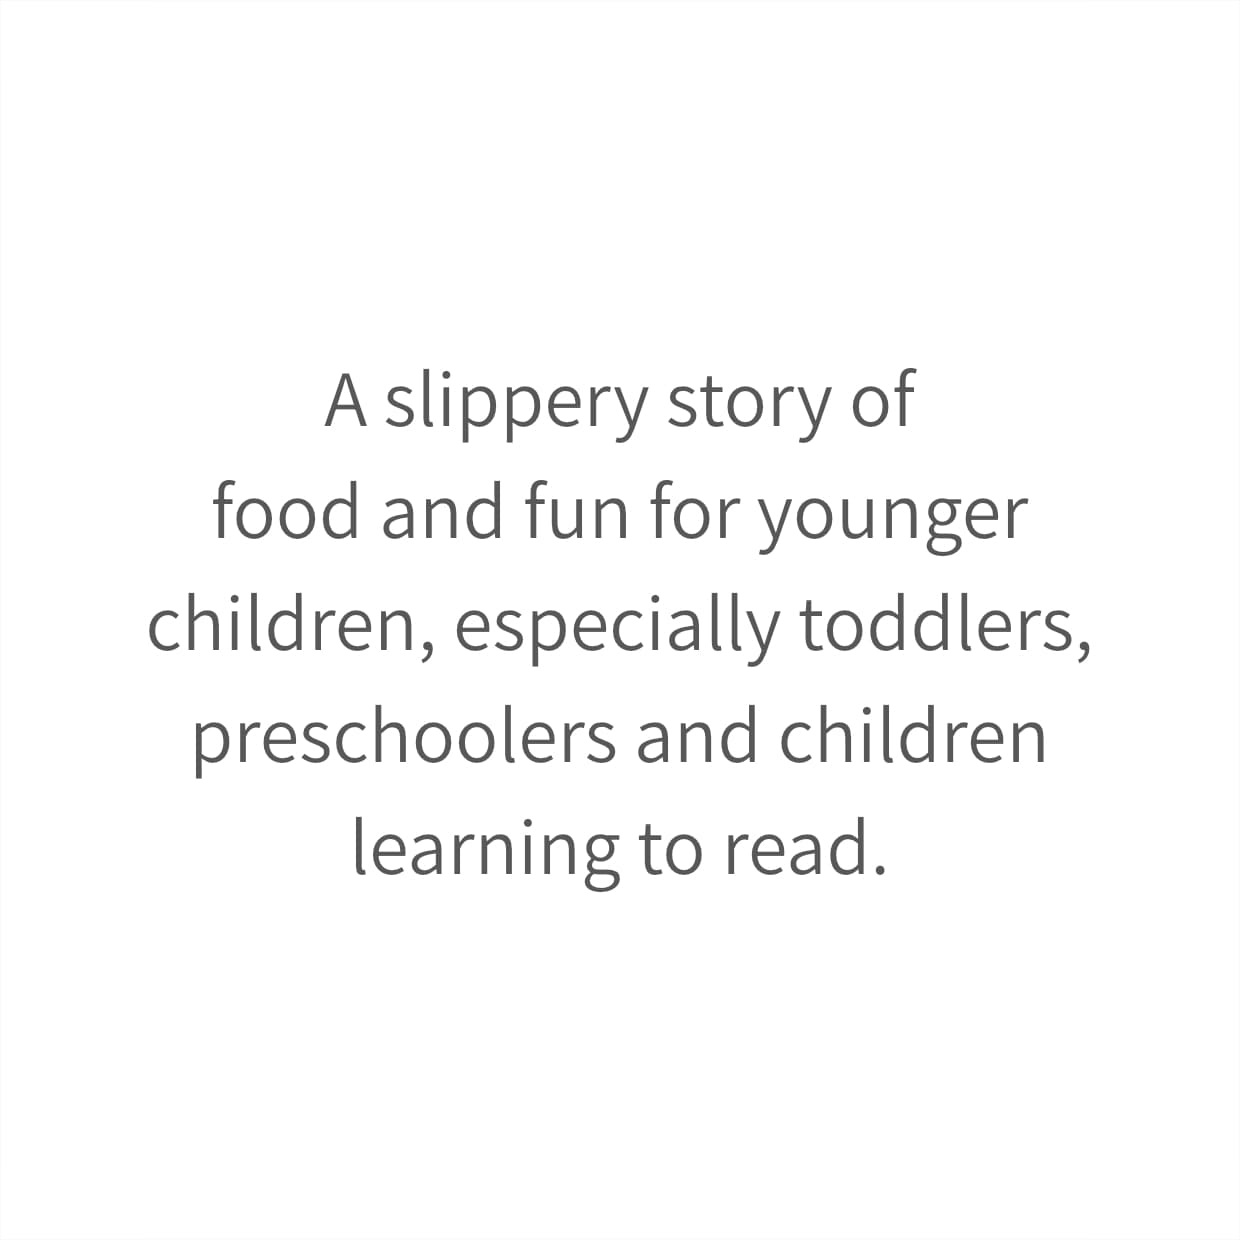 A slippery story of food and fun for younger children, especially toddlers, preschoolers and children learning to read.